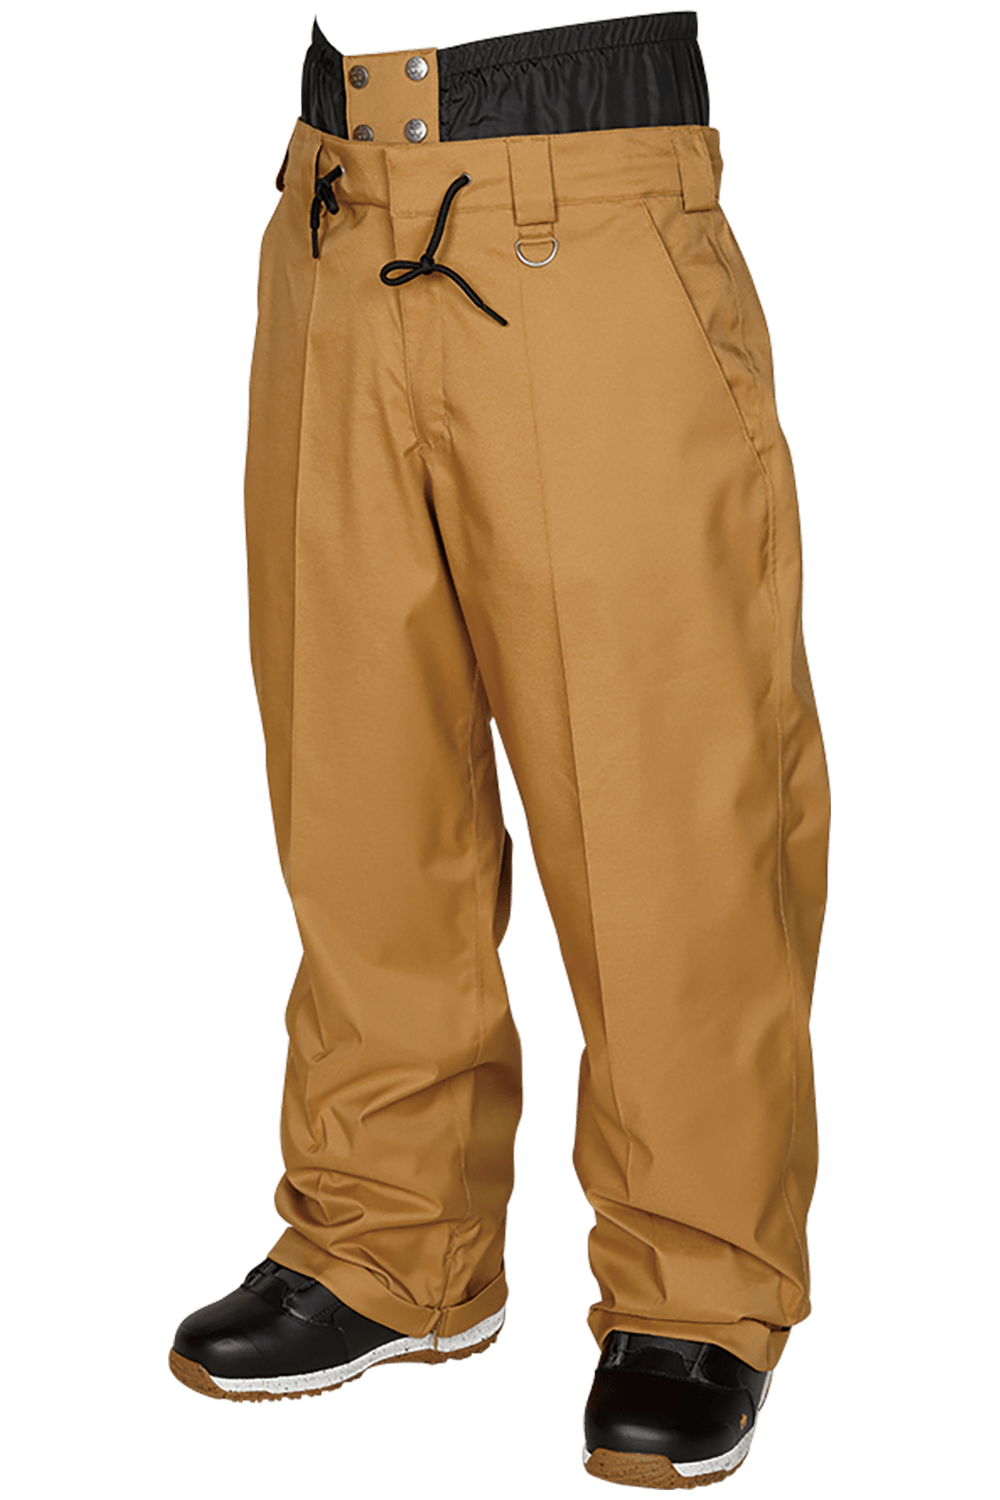 WORK PANTS | Scape Outerwear